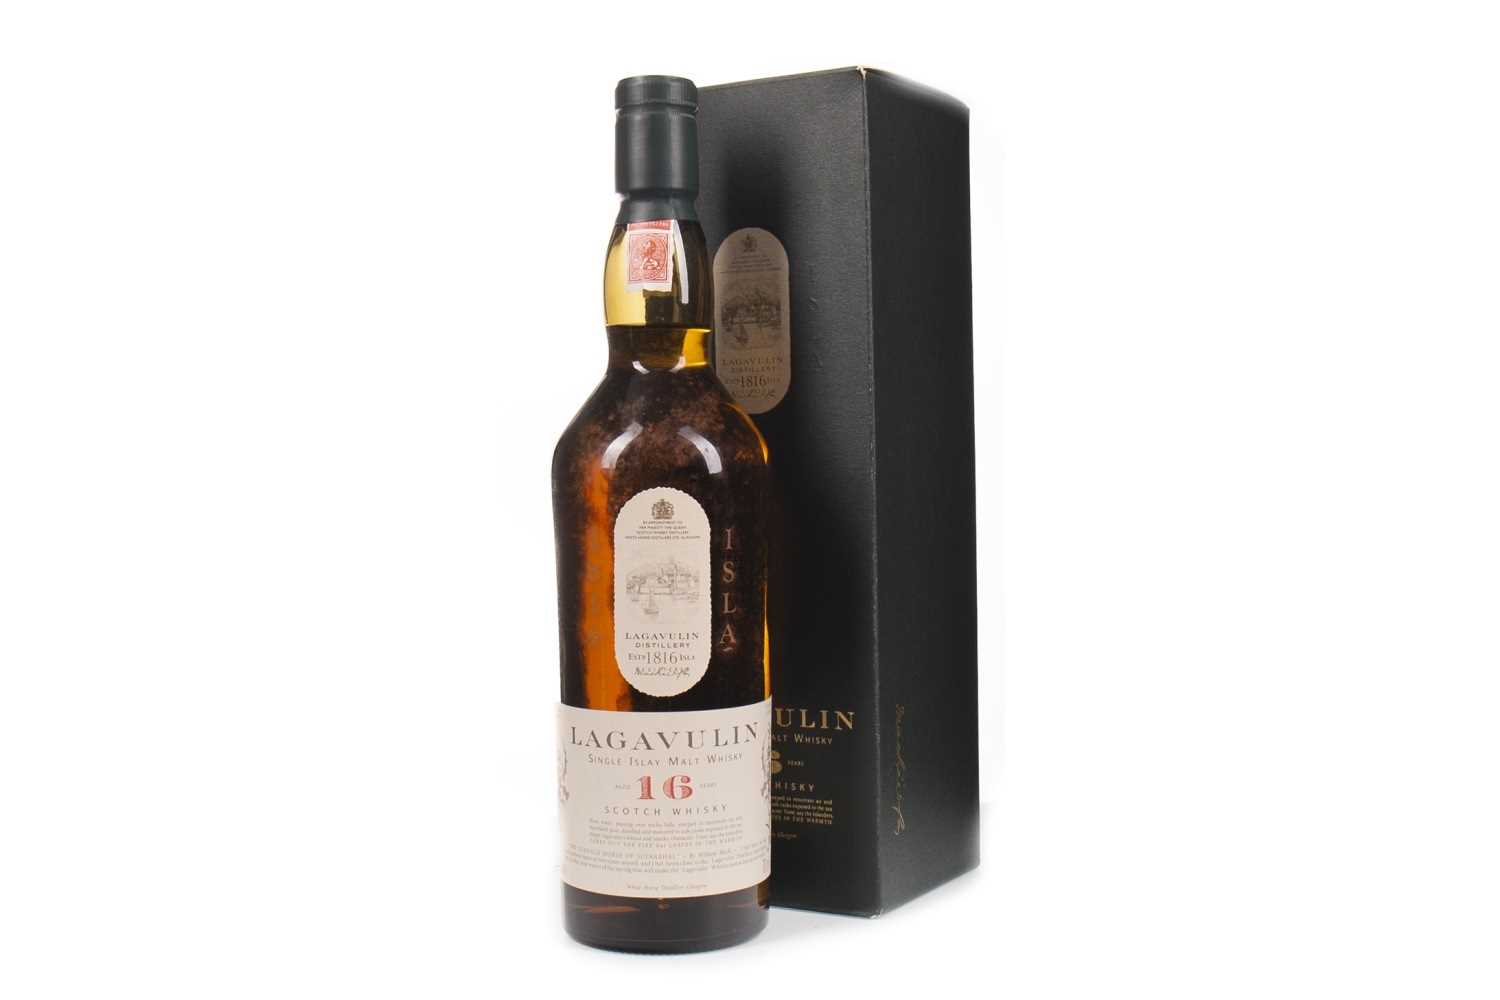 Lot 71 - LAGAVULIN AGED 16 YEARS WHITE HORSE DISTILLERS